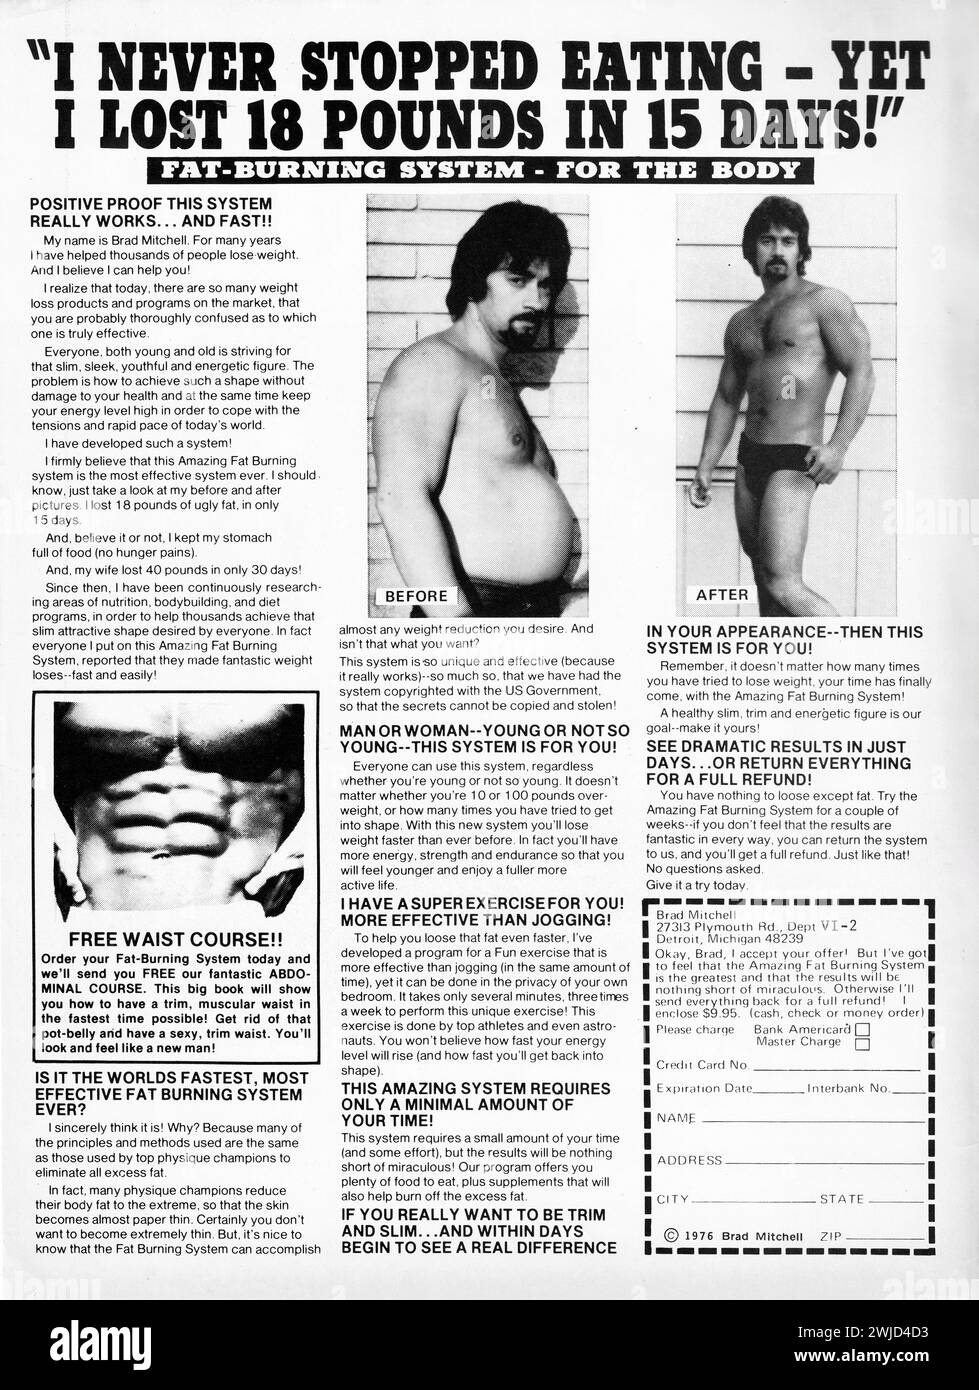 TOO GOOD TO BE TRUE? An ad from a late 1970s periodical suggesting  the purchasing a book on the Amazing Fat Burning System which will transform  you from big belly to muscular in 15 days. Stock Photo